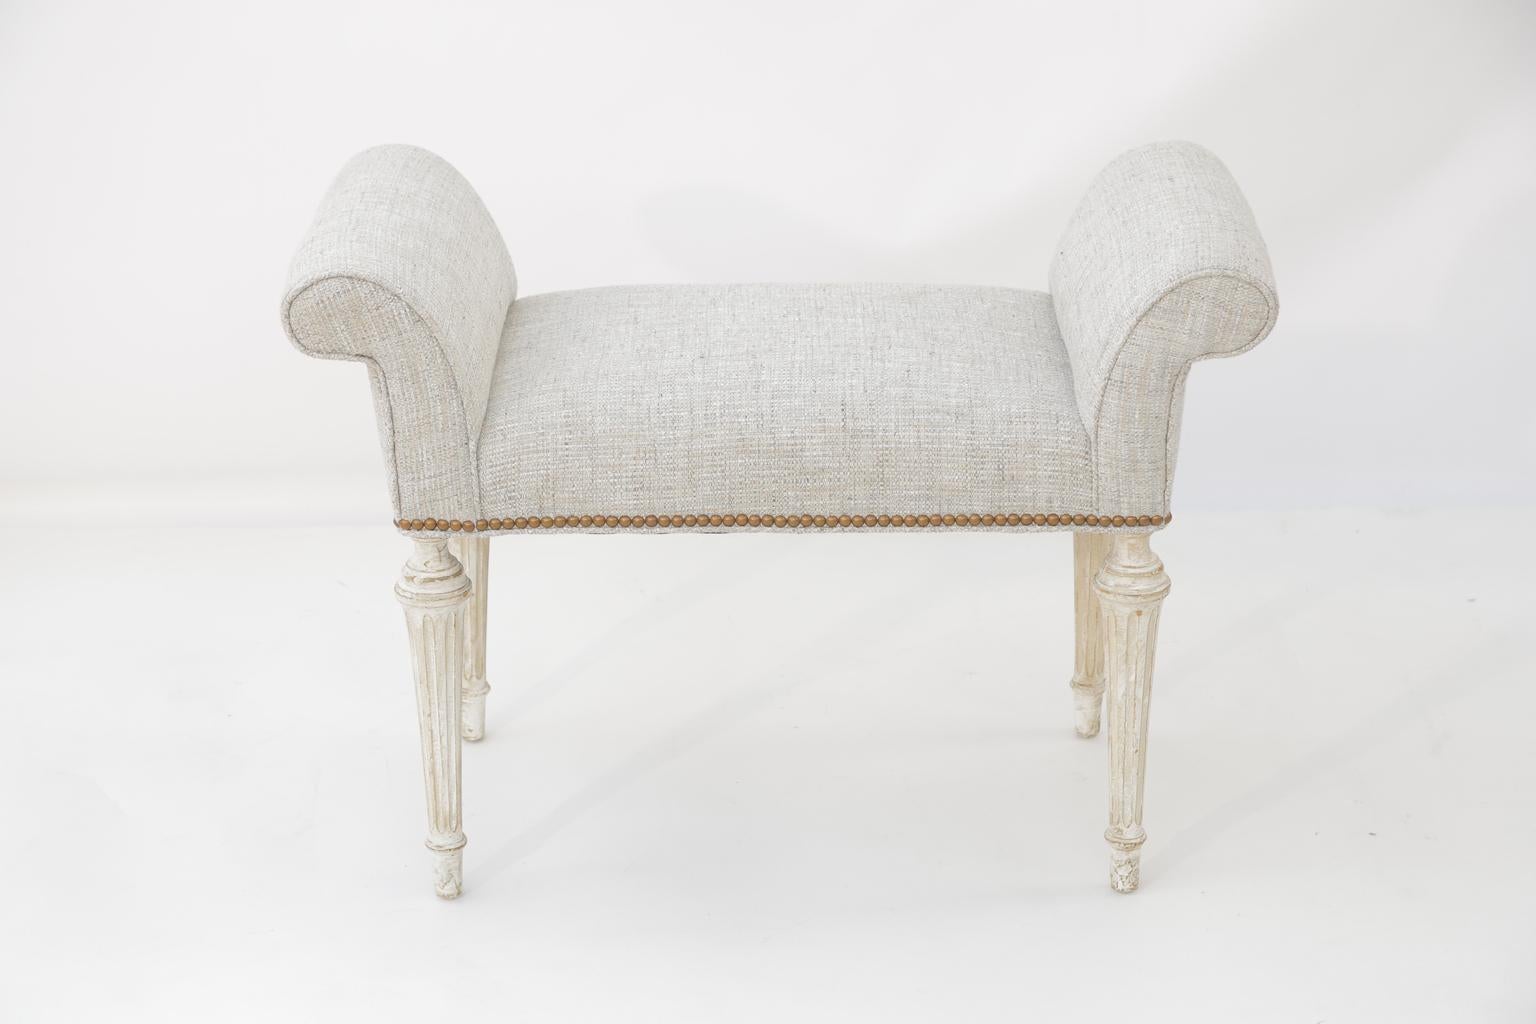 Bench, having generous rolled arms flanking its crown seat, its ivory painted base showing natural wear; raised on four, round, fluted, tapering legs, ending in touipe feet. Upholstered in a light blue weave with nailheads.

Stock ID: D3489